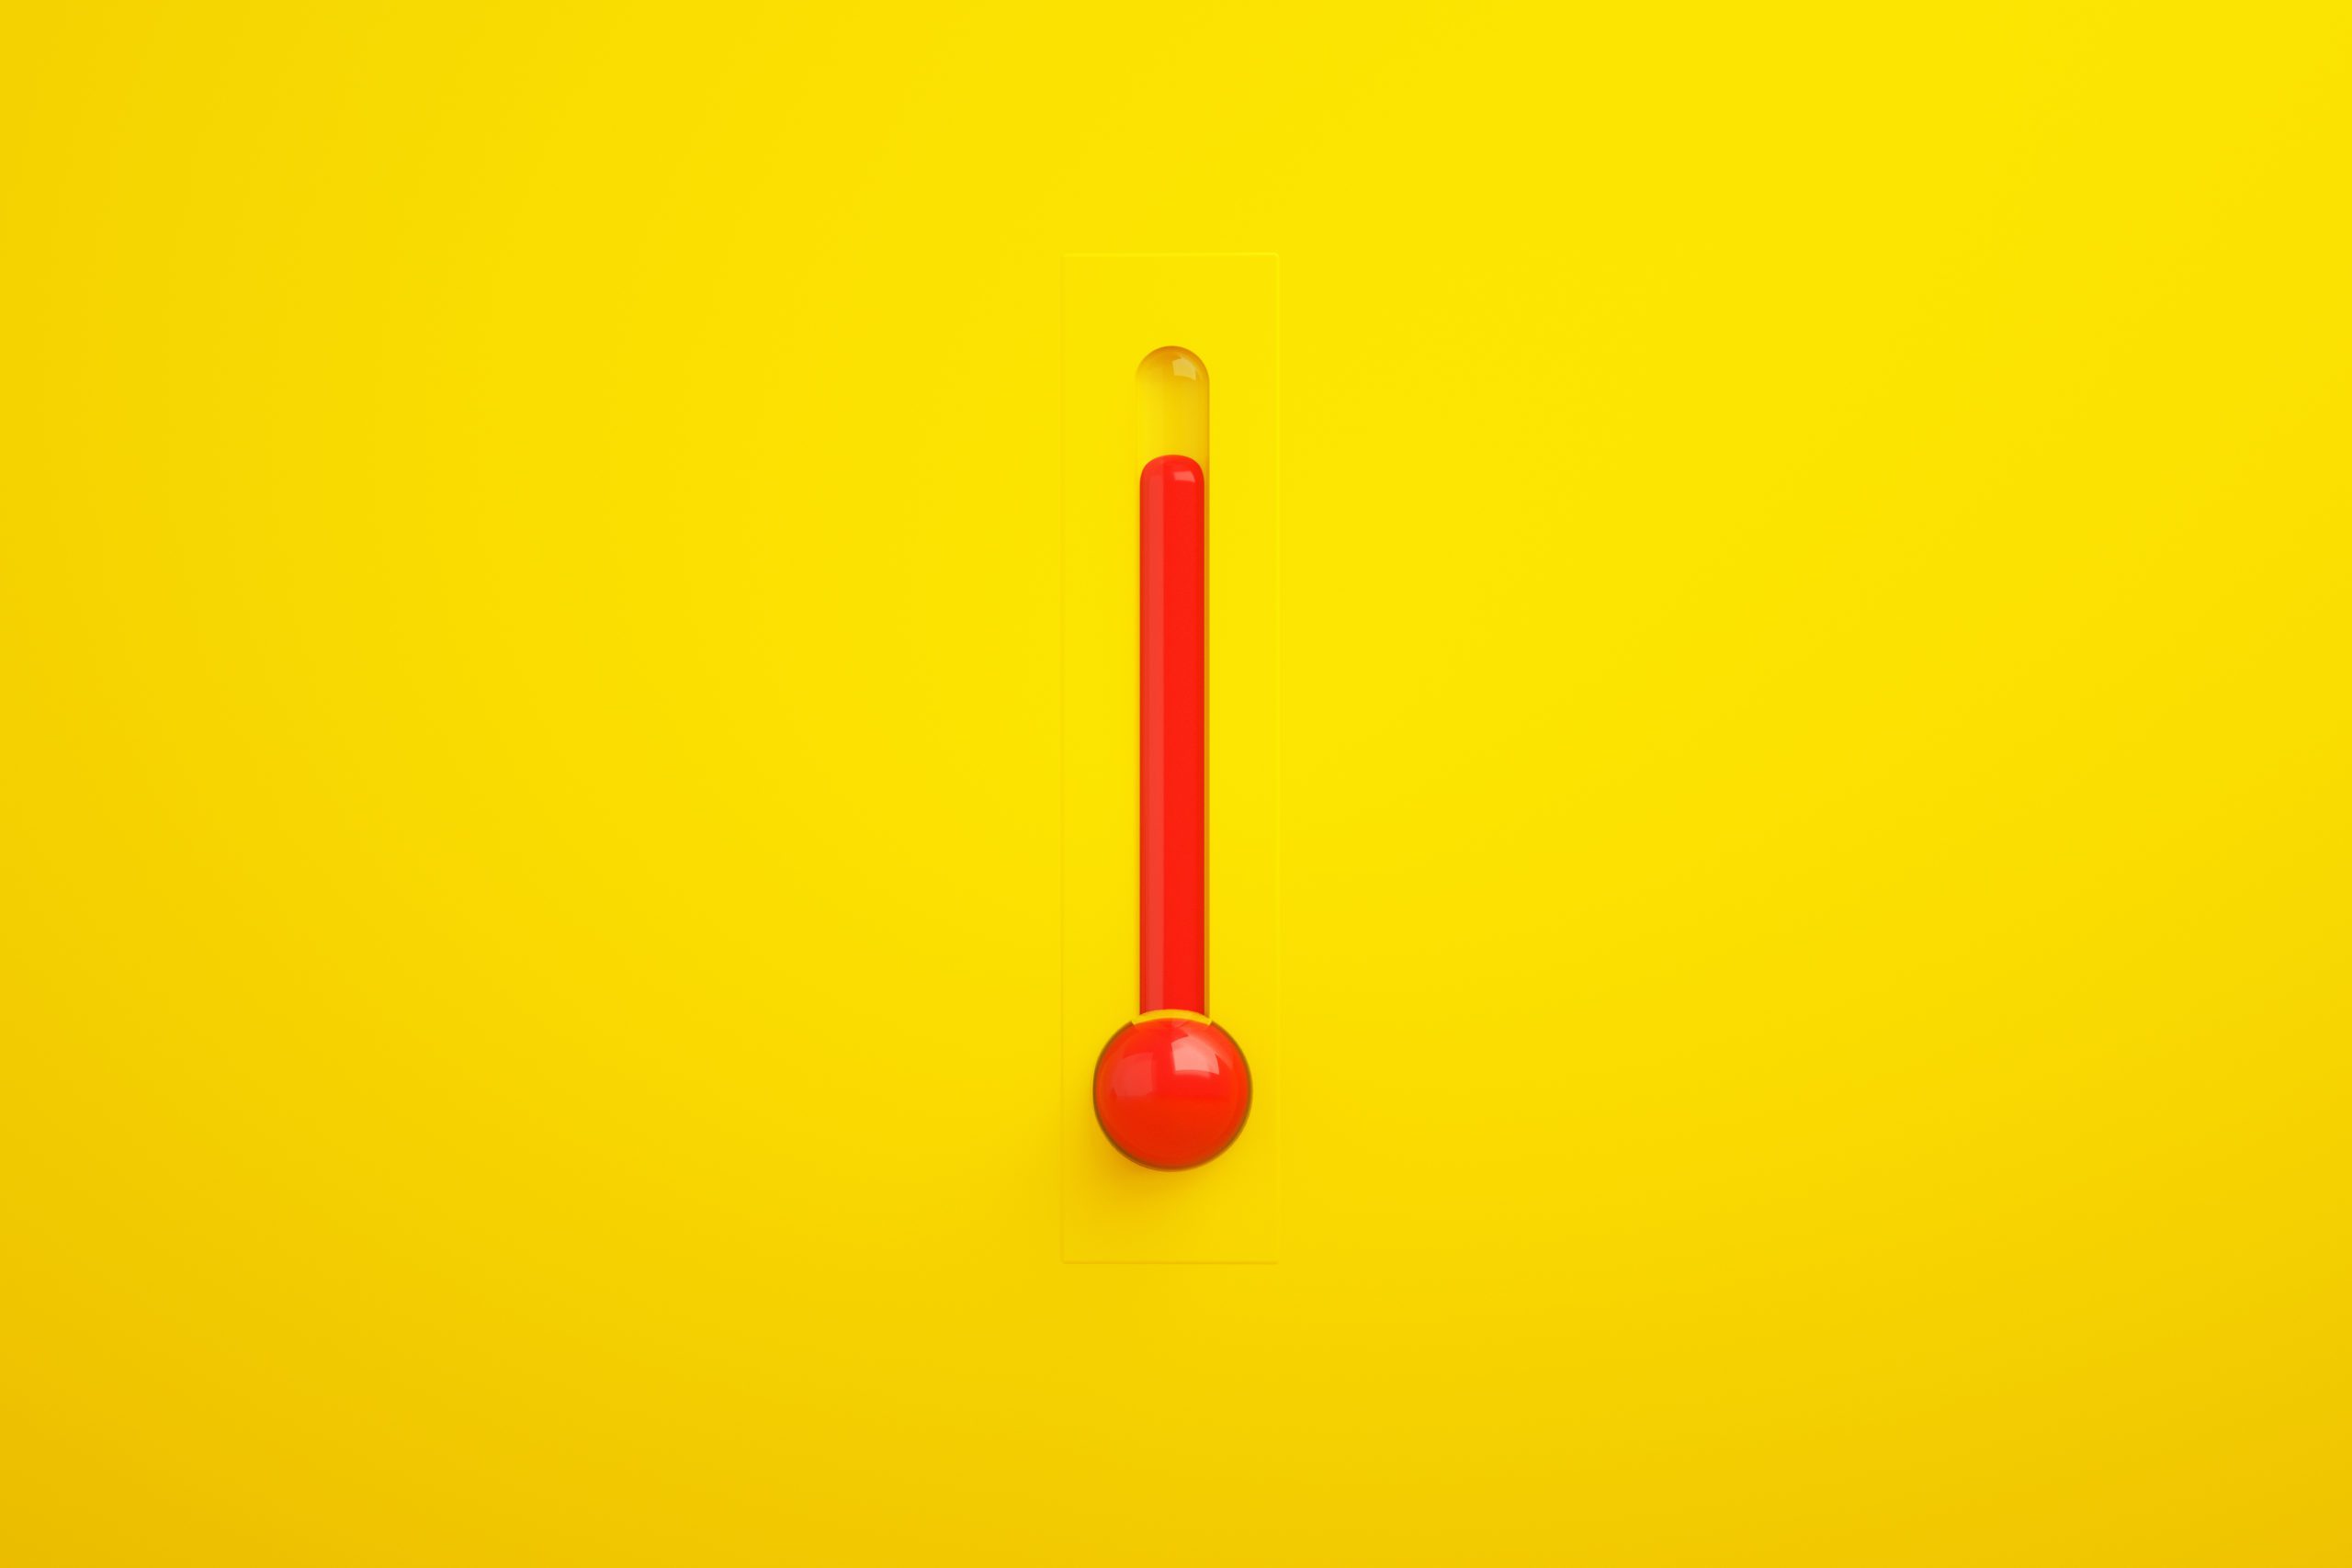 red thermometer